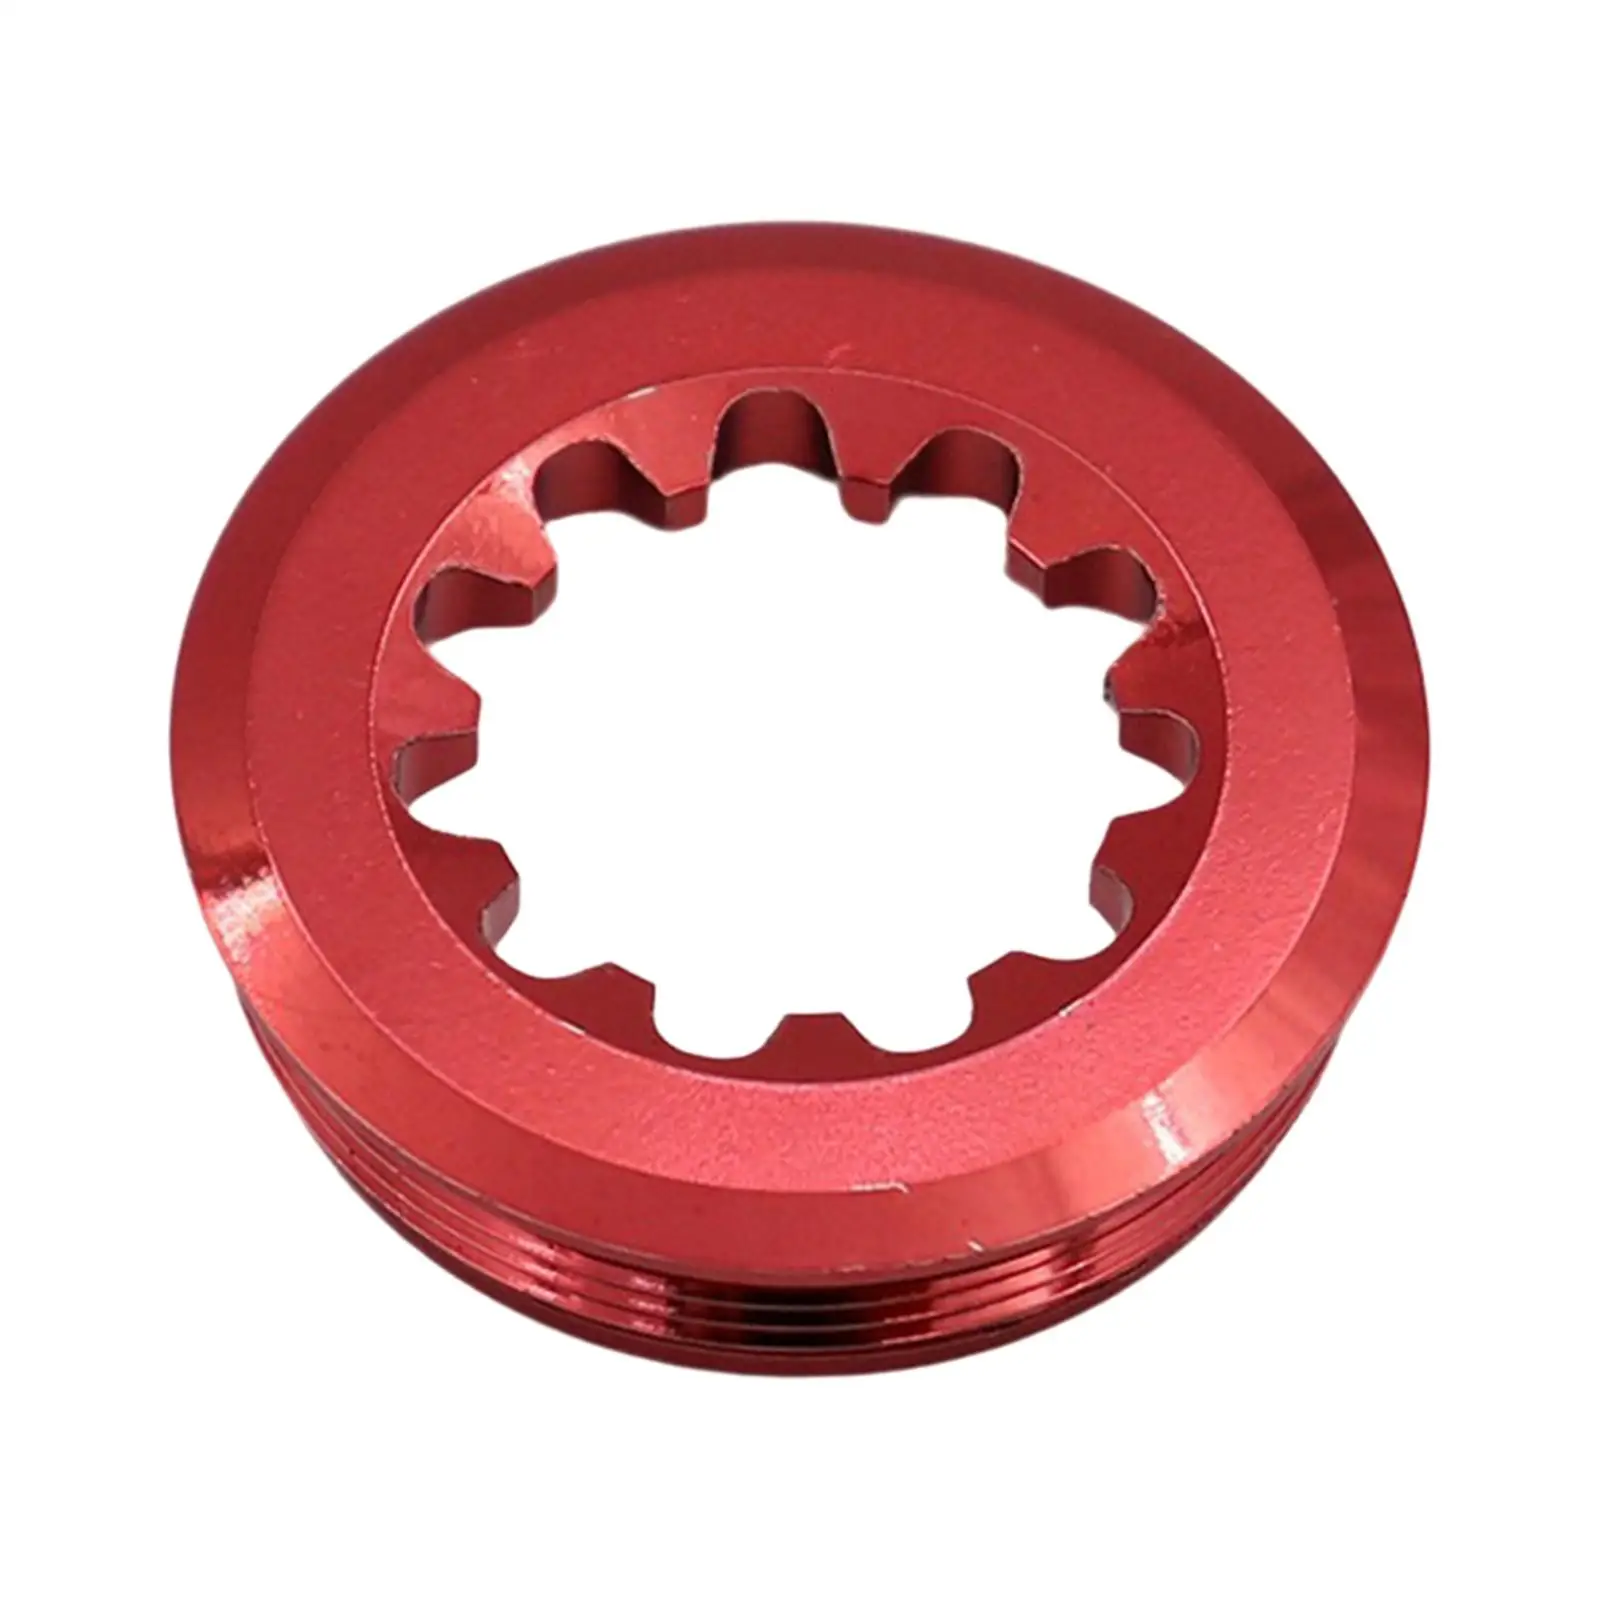 Bike Crankset Parts Crank Arm Bolt Bicycle Crank Cover Fixing Screw Chainwheel Screw for Mountain Road Bikes Cycling Accessories